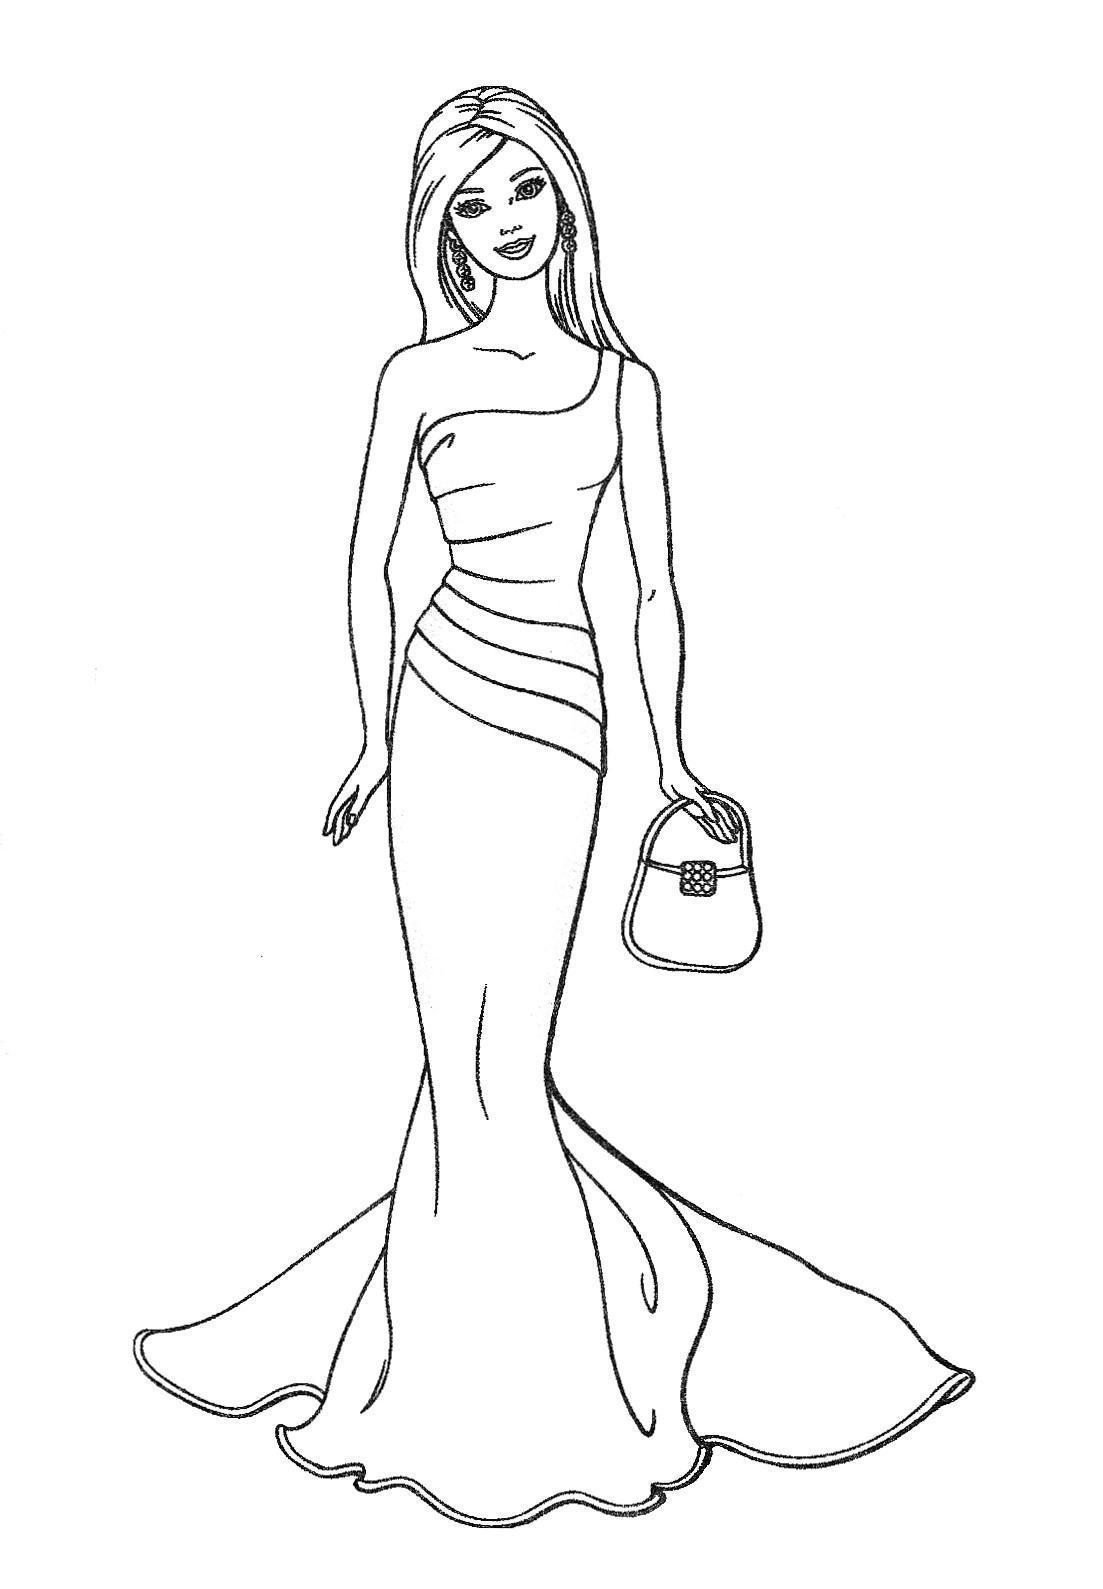 Barbie coloring pages to print - Barbie Kids Coloring Pages